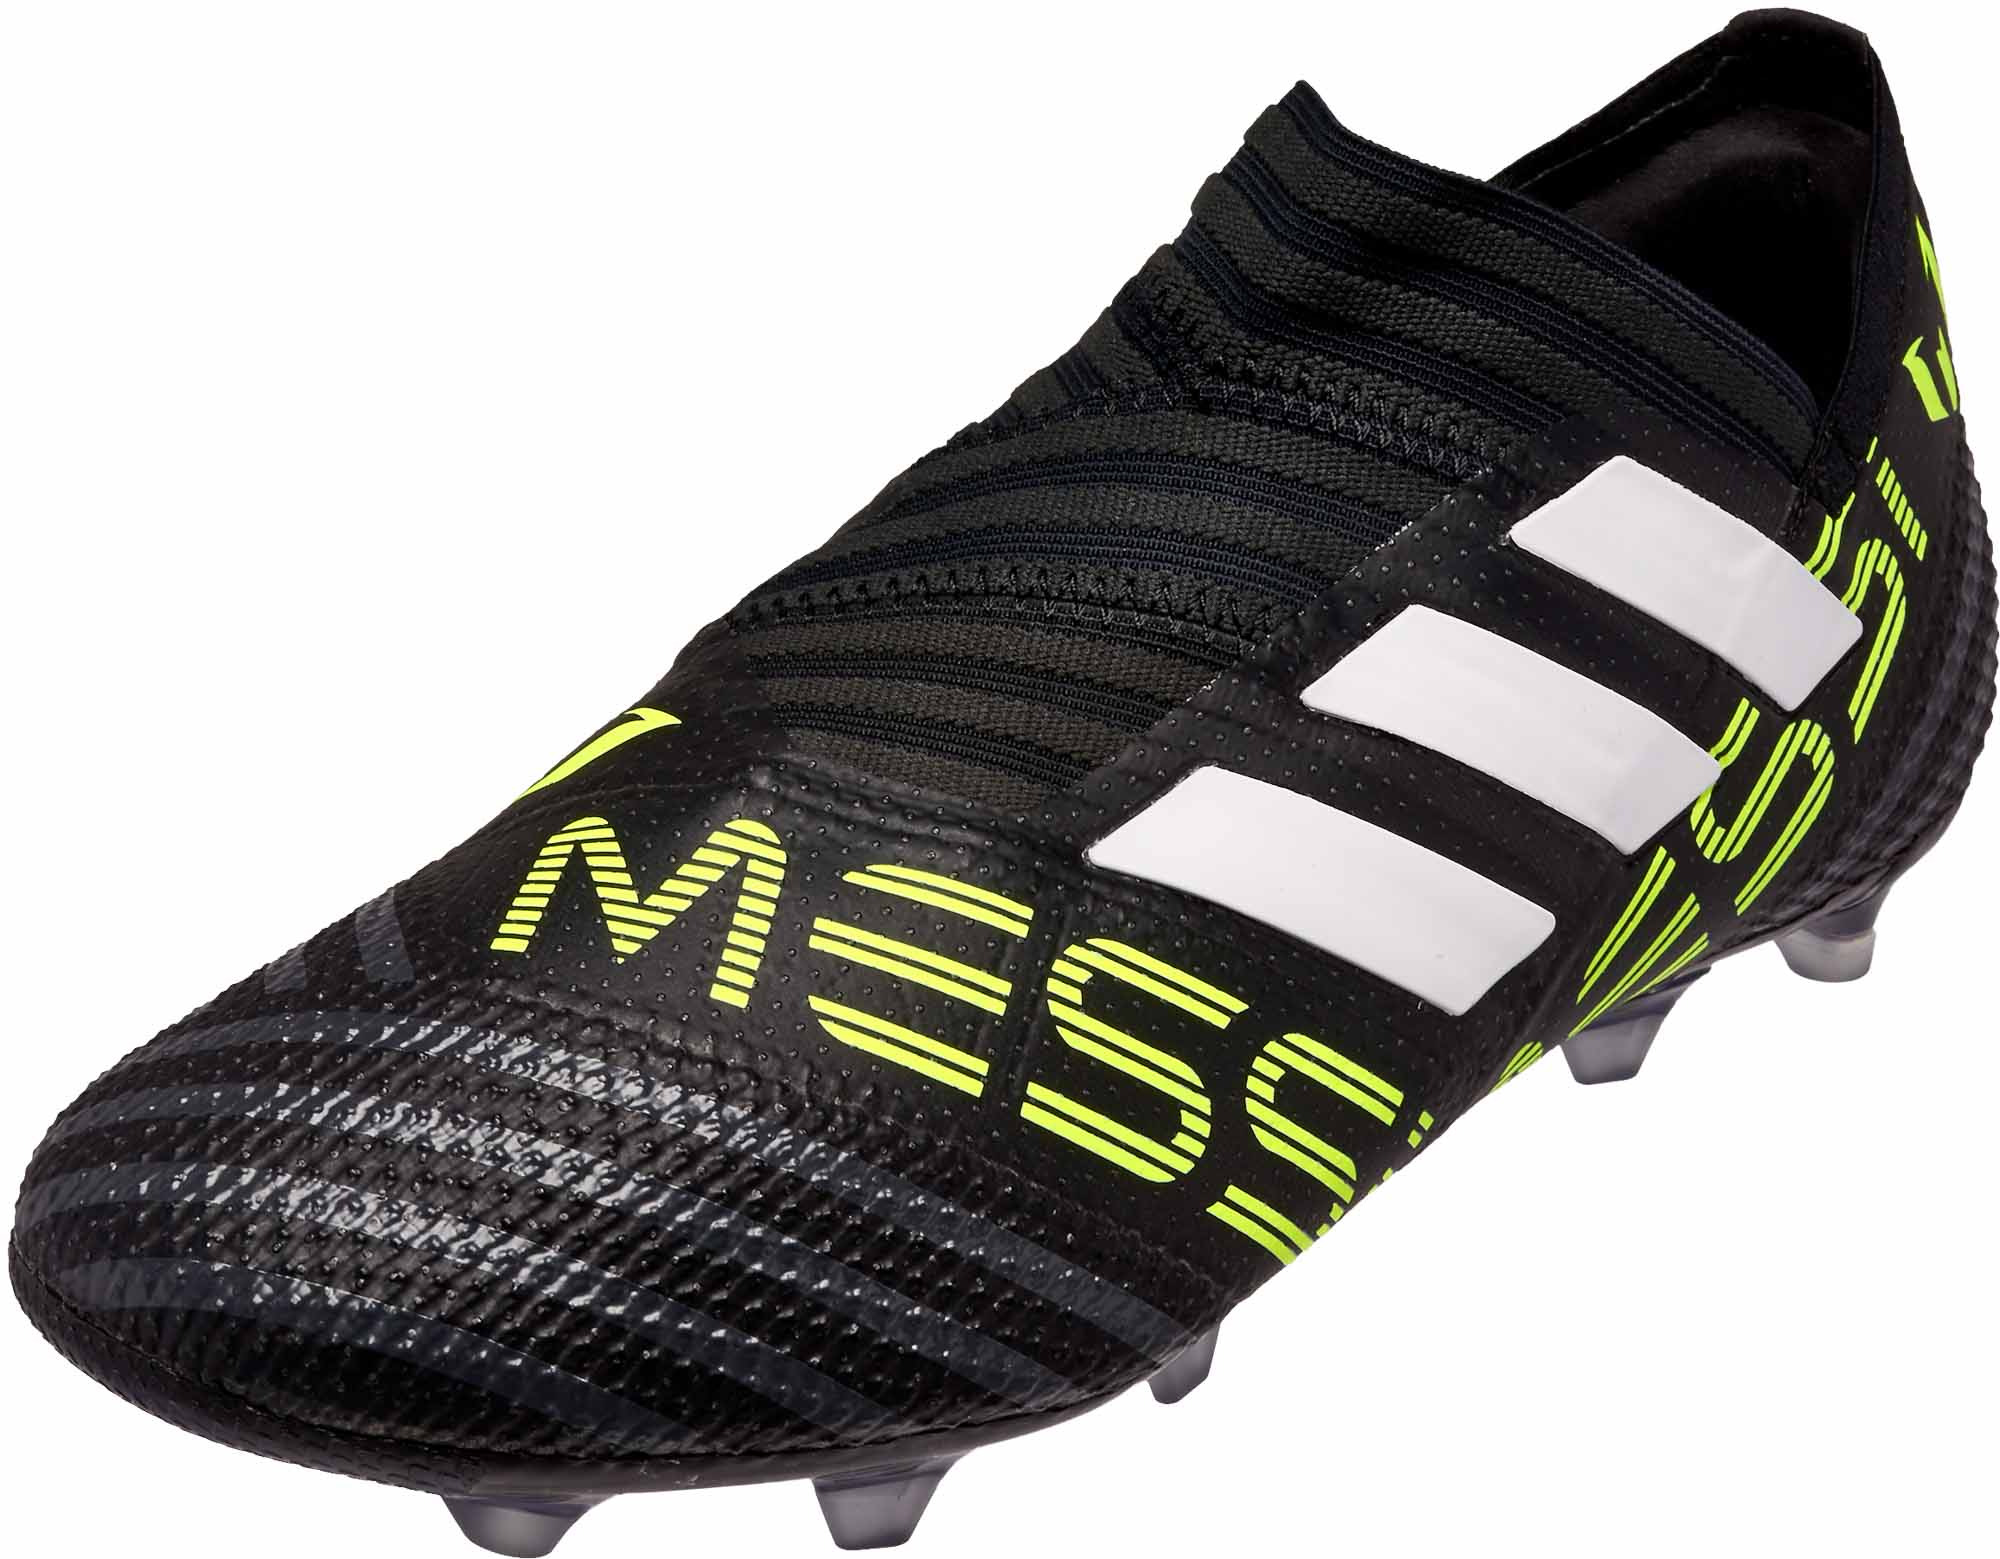 messi cleats without laces